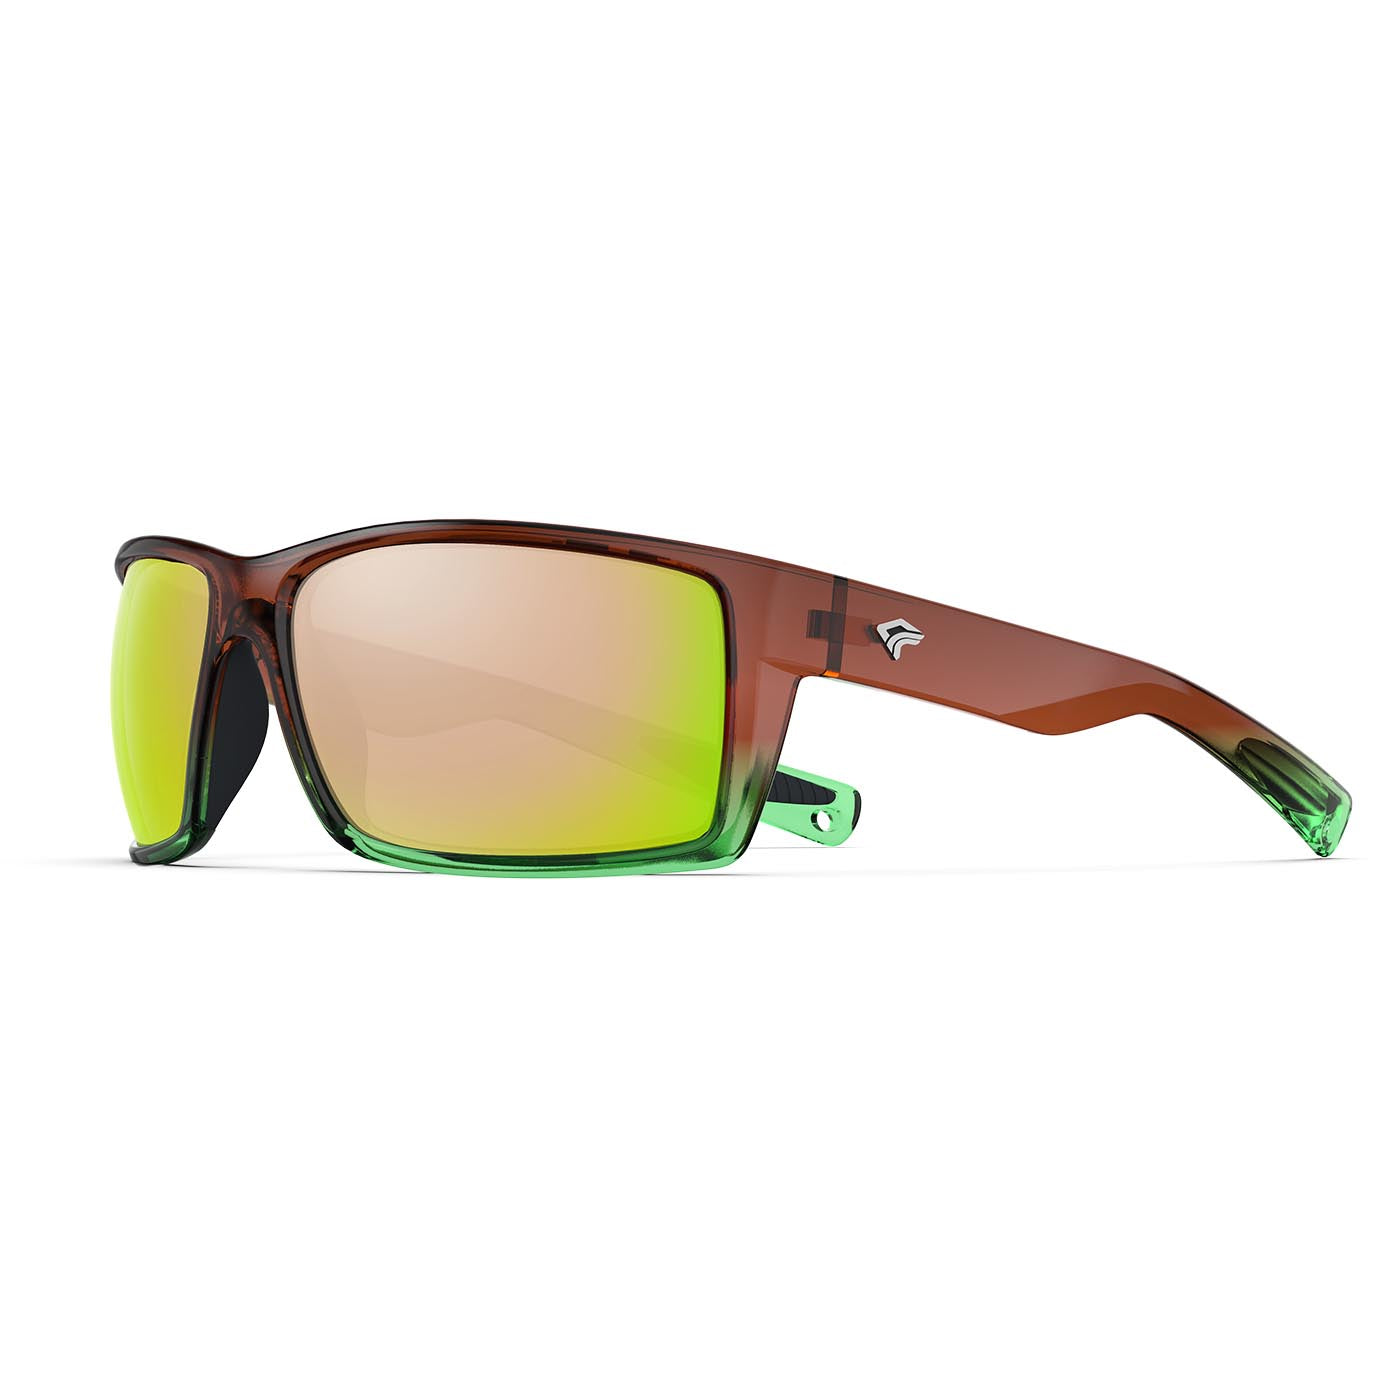 Chameleon Polarized Sports Sunglasses for Men and Women With Lifetime  Warranty - Perfect for Sports, Fishing, Boating, Beach, Golf & Driving -  Chameleon Frame & Pink Green Lens